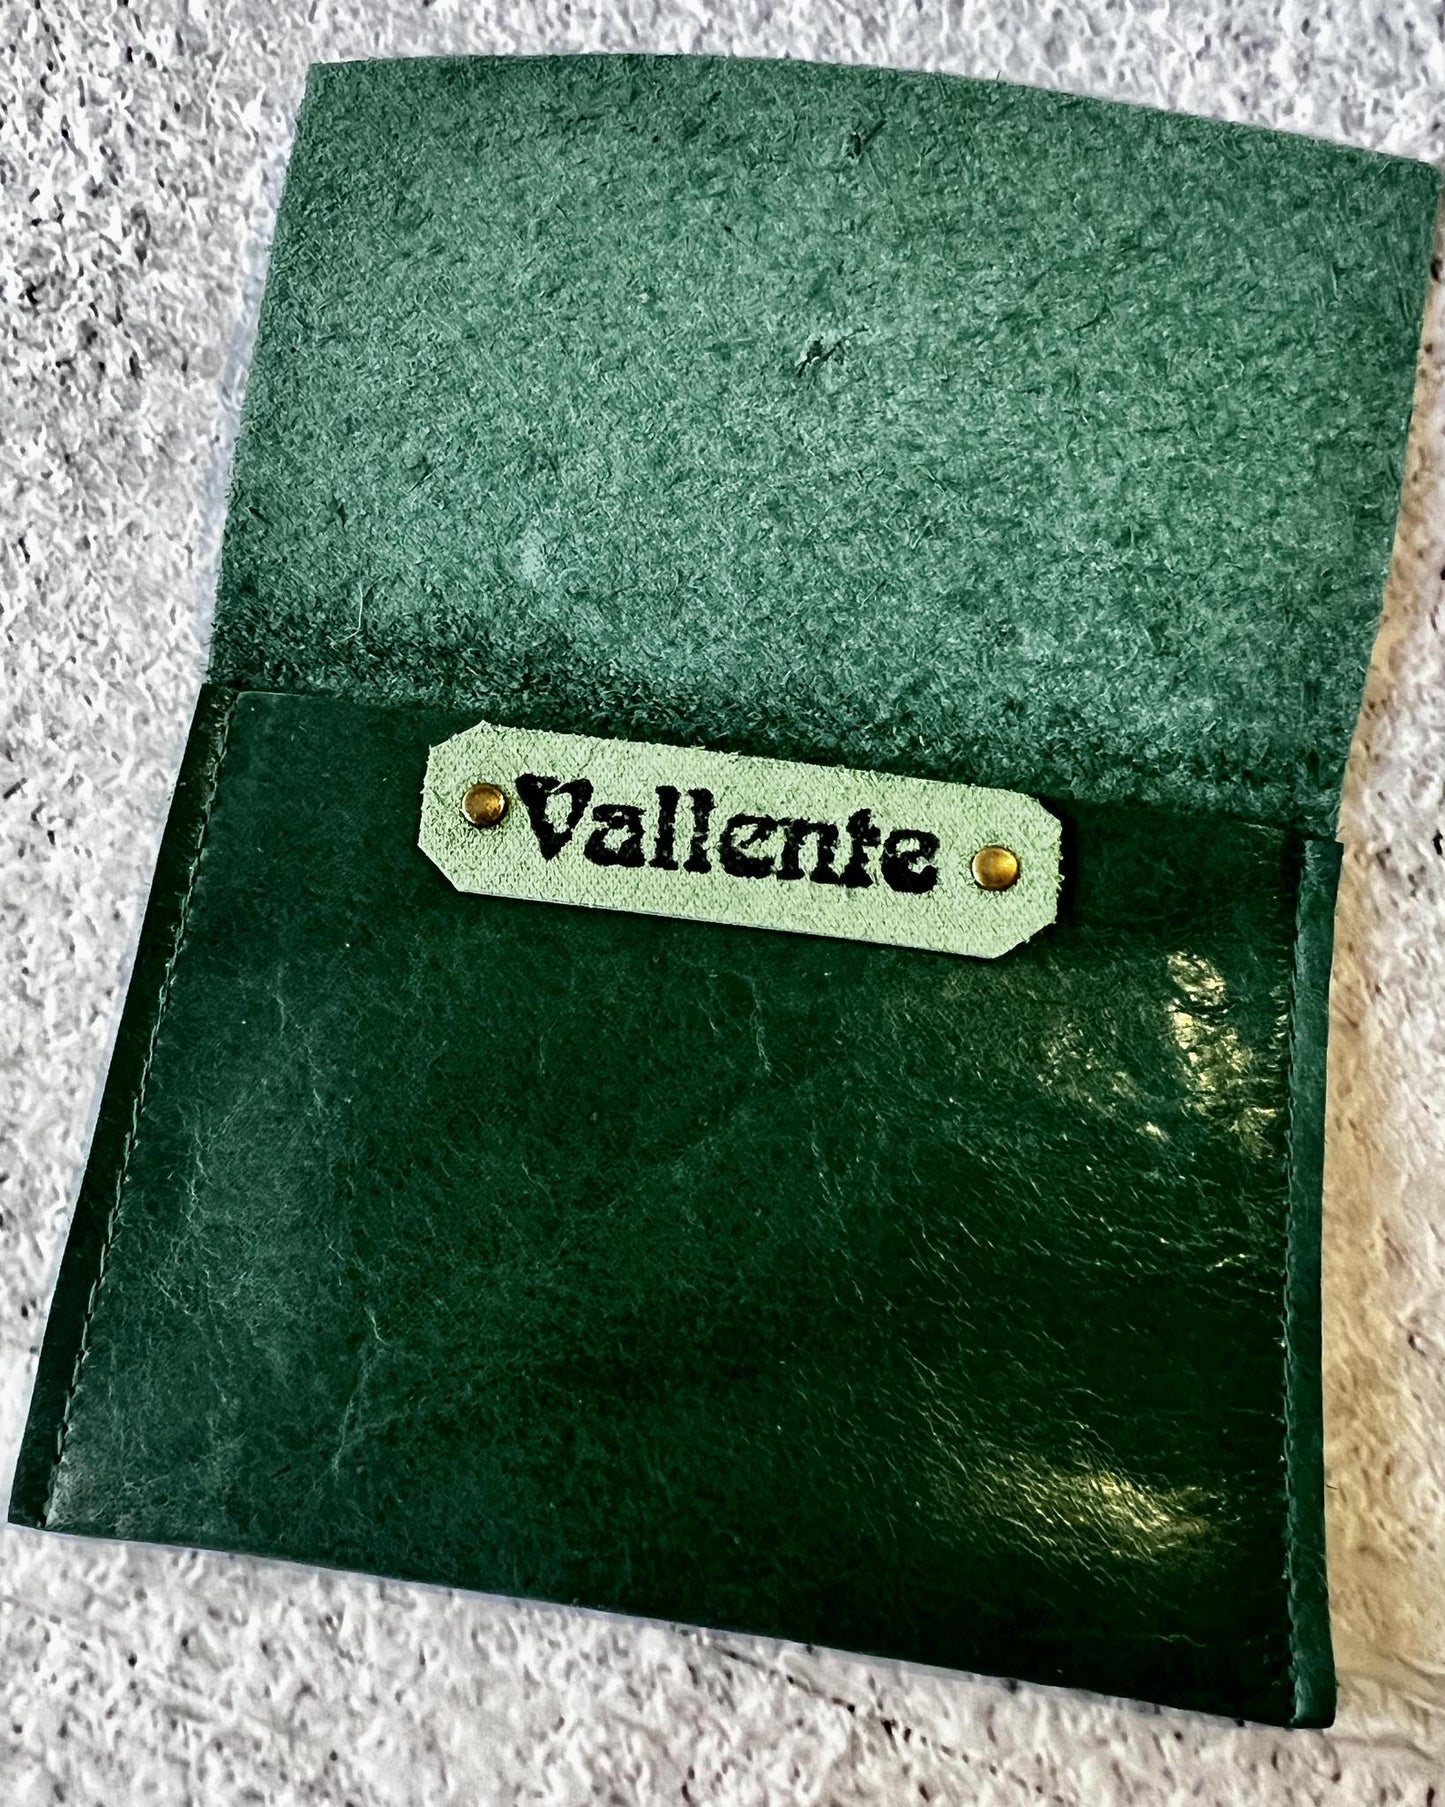 Vallente Leather Lil' Stamped Wallet Kelly Green with Double Eagle